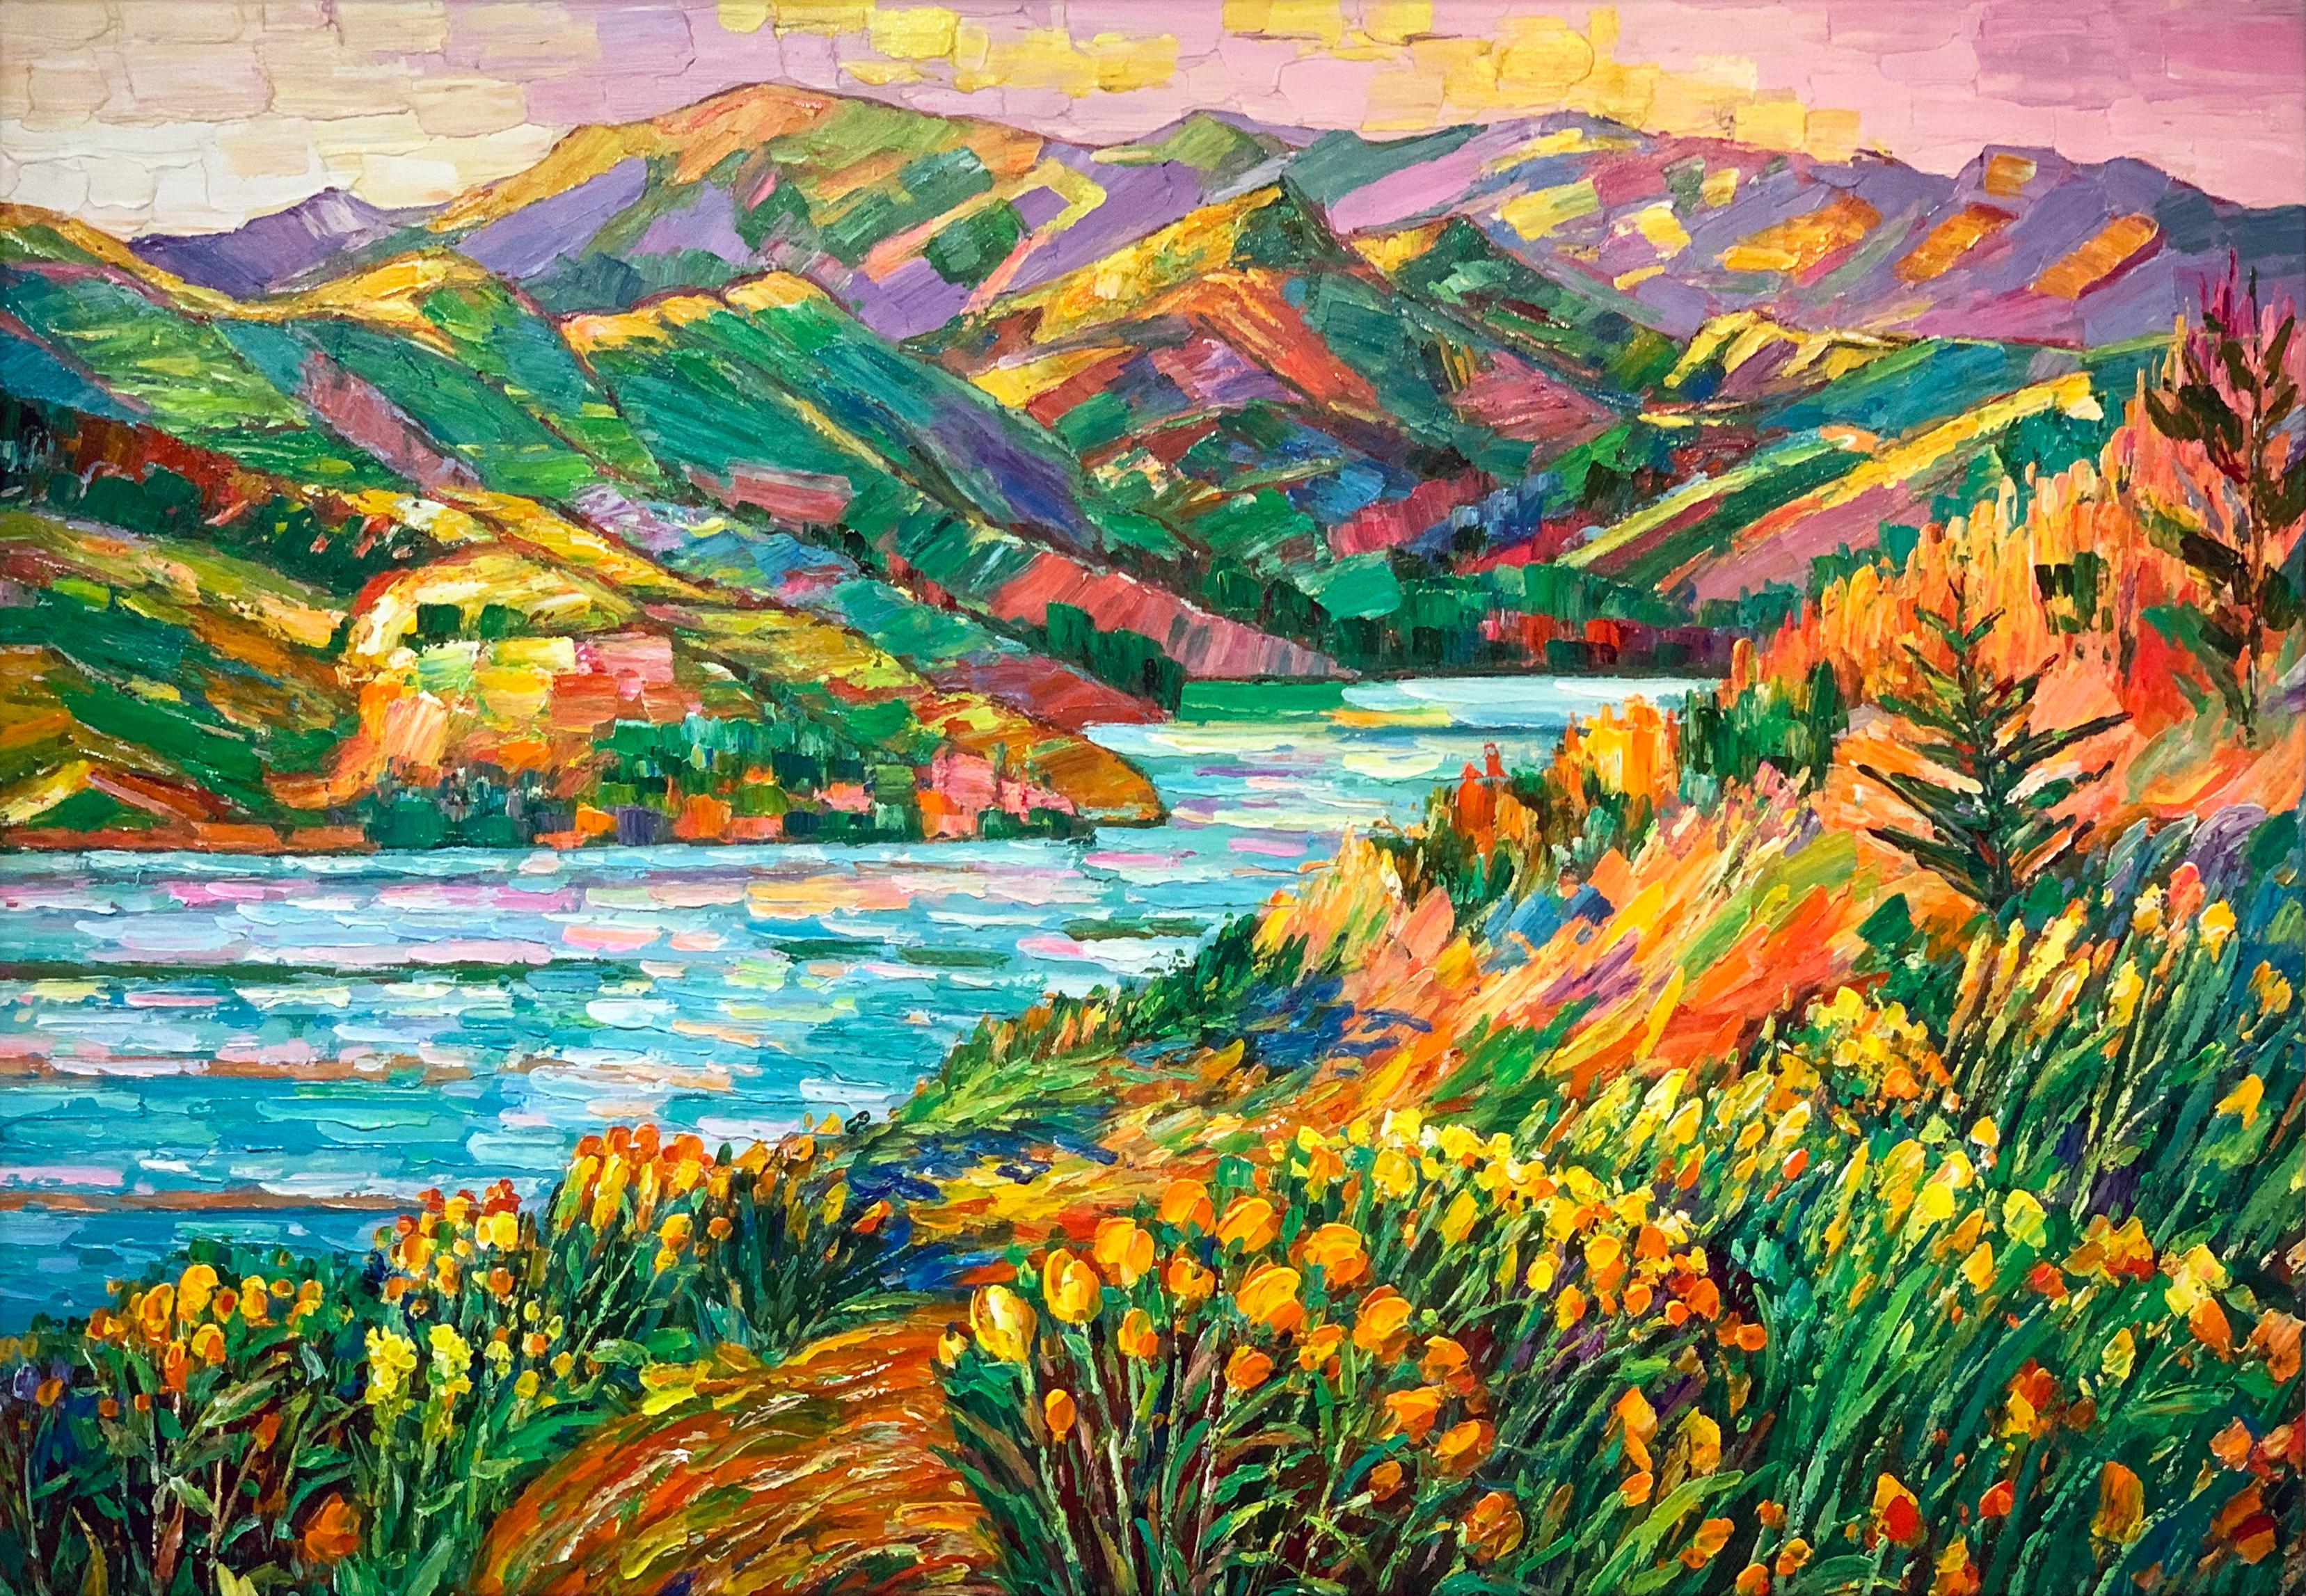 Katharina Husslein Landscape Painting - Rivers and Mountains by K. Husslein Contemporary Impressionist Nature Painting